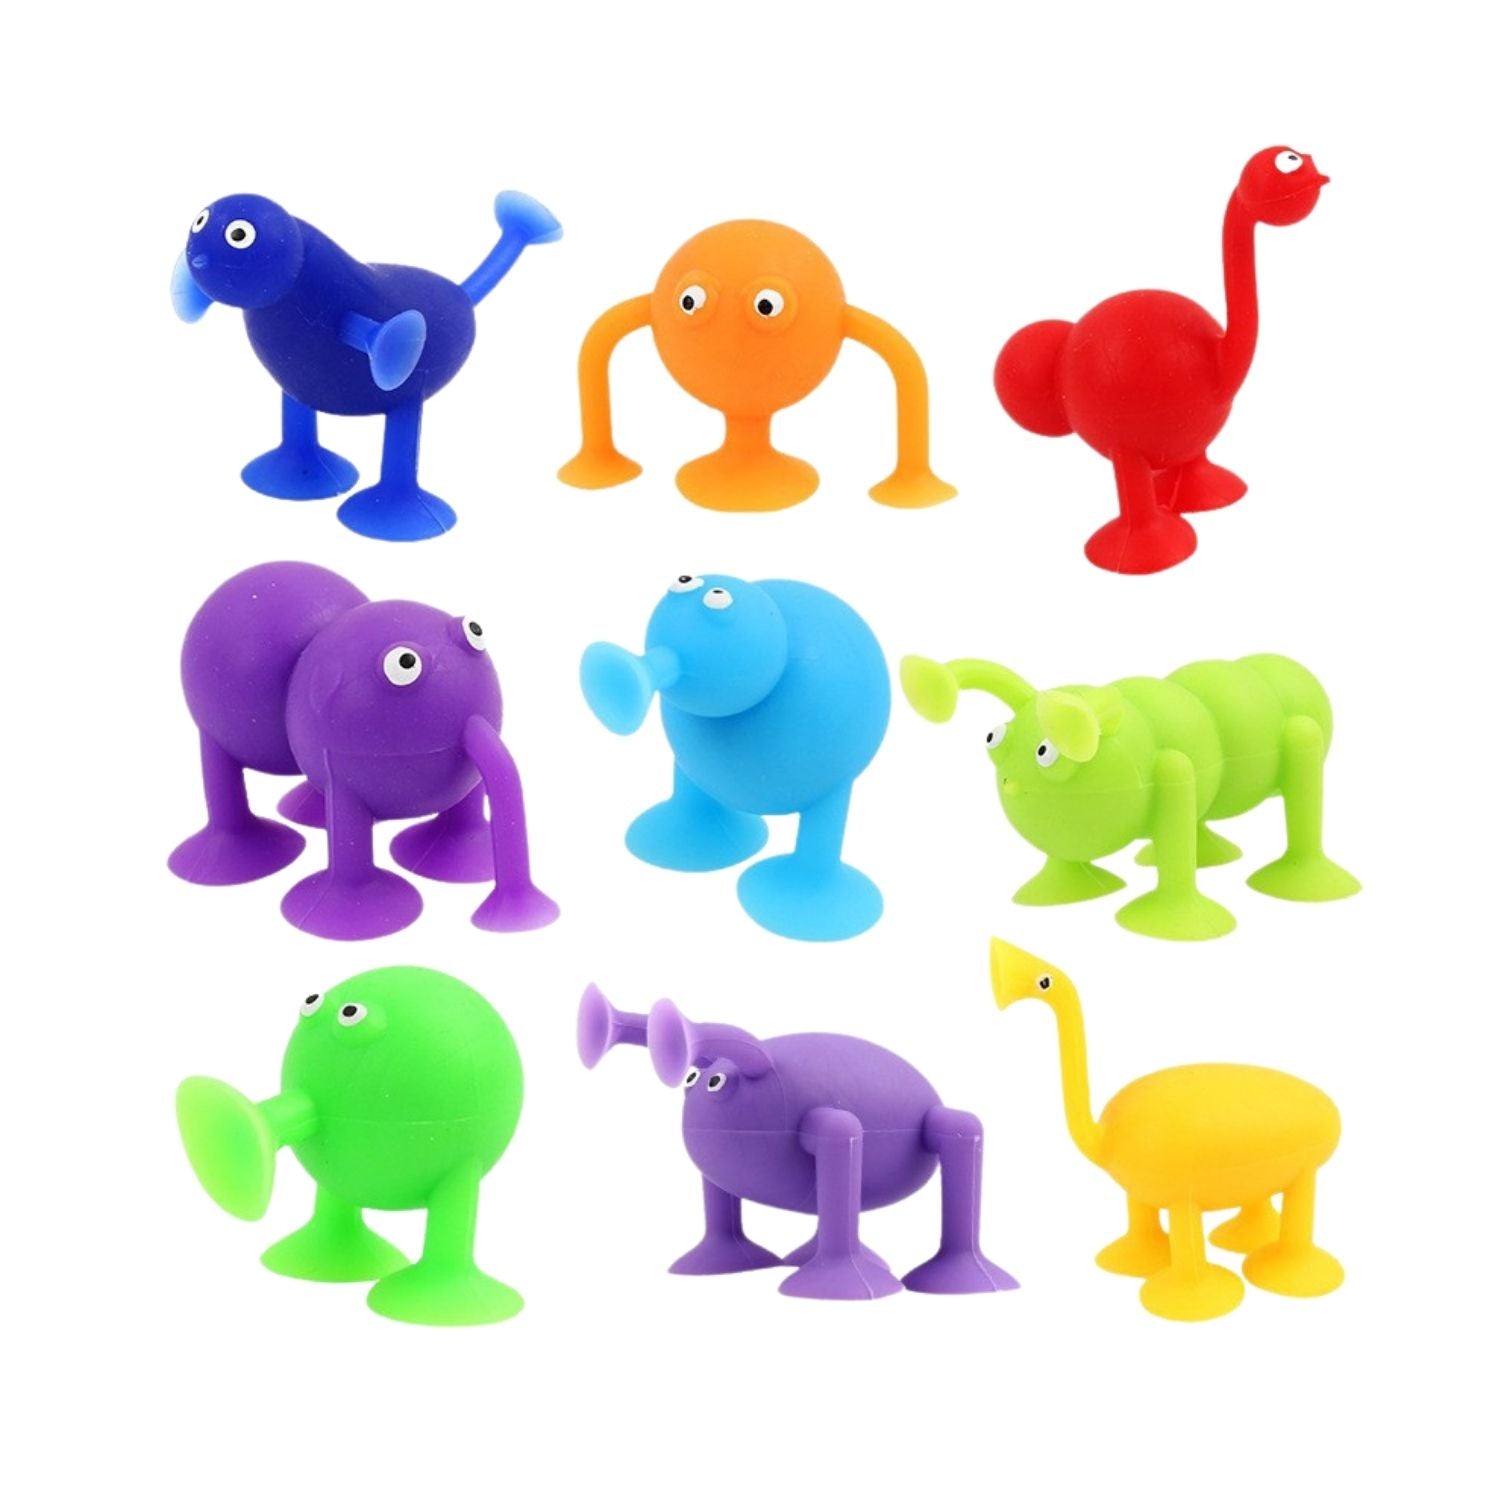 GOMINIMO 38 Pcs Suction Cup Toys